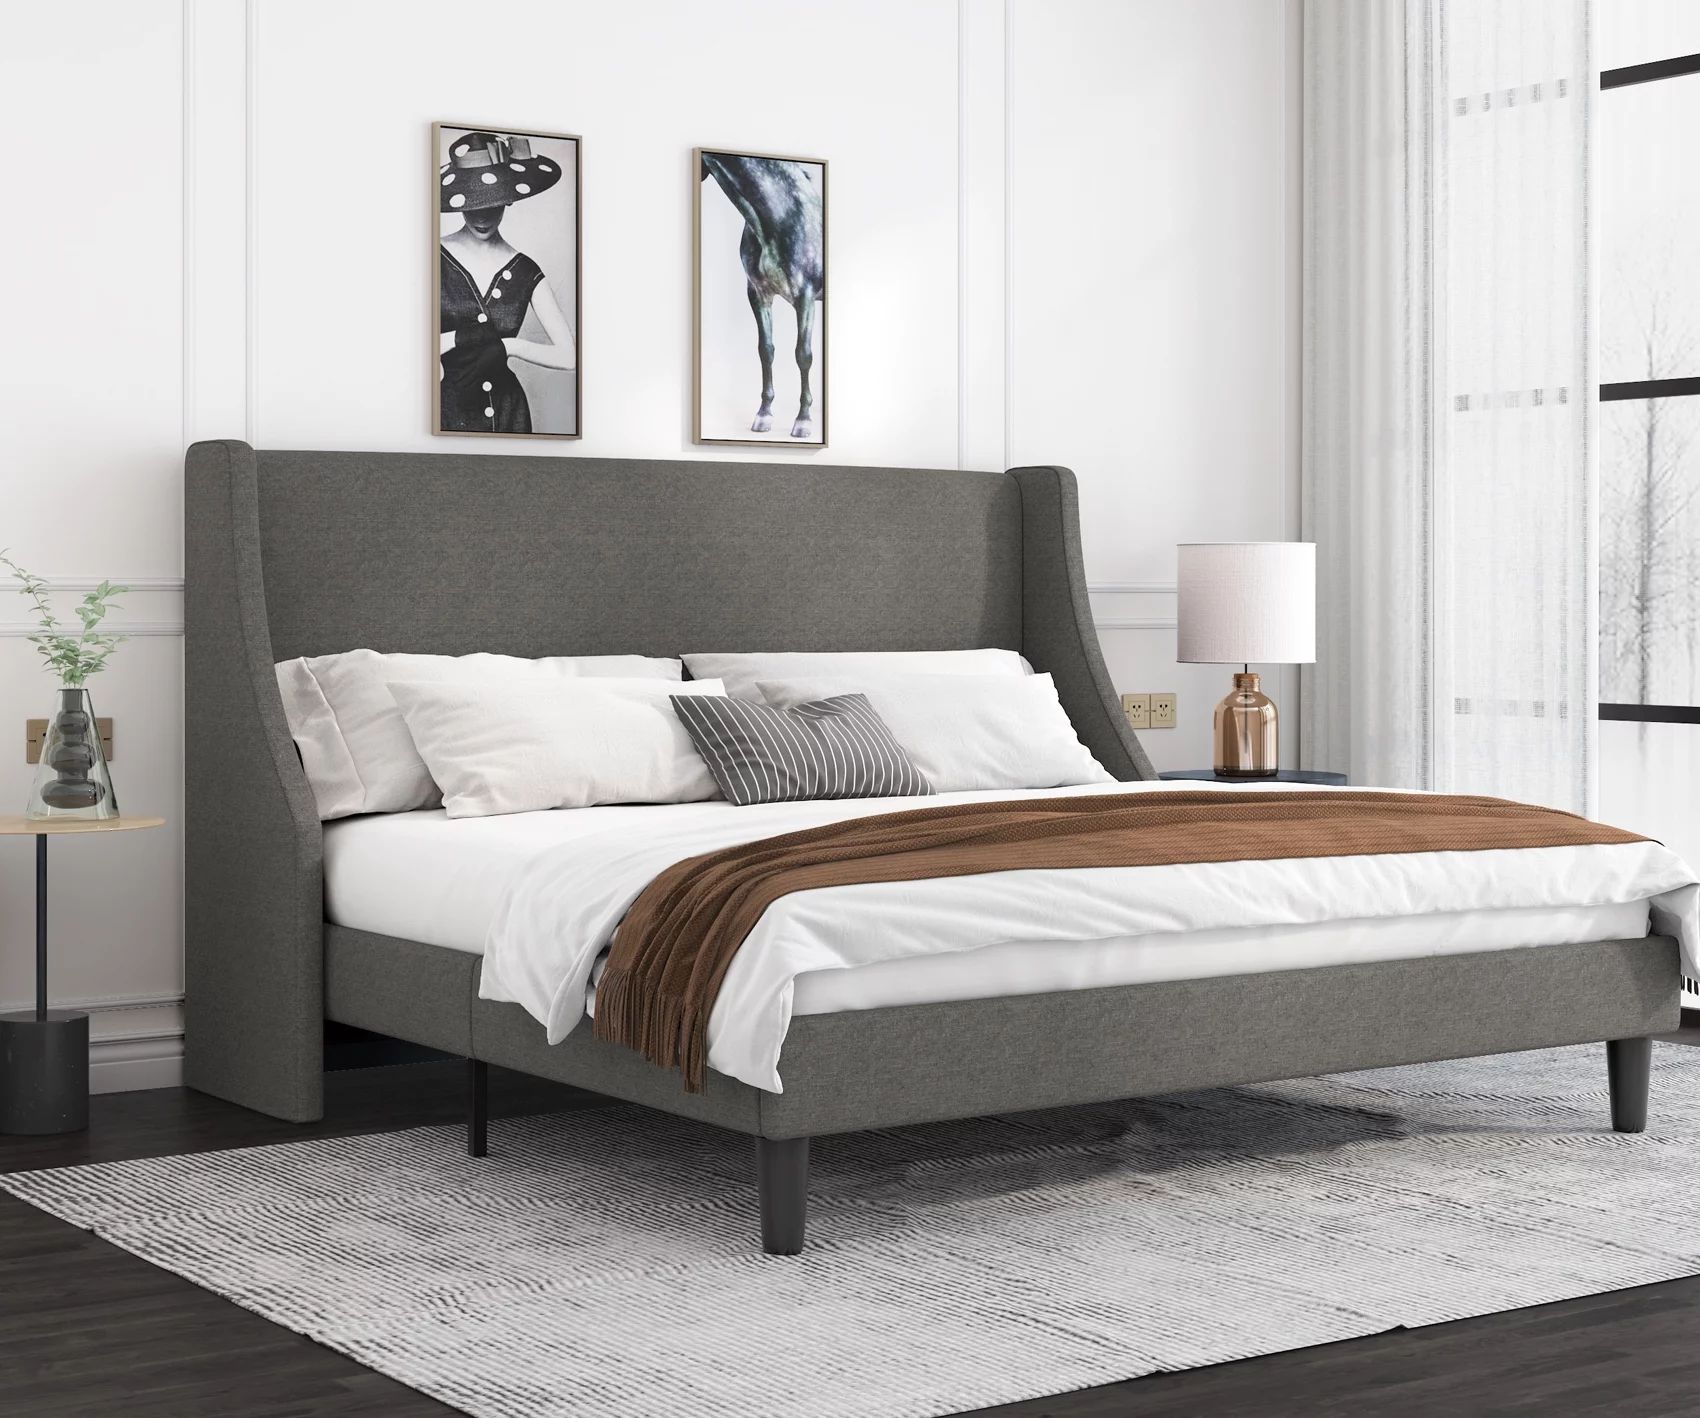 Allewie King Size Fabric Upholstered Platform Bed Frame with Wingback Headboard, Light Grey - Wal... | Walmart (US)